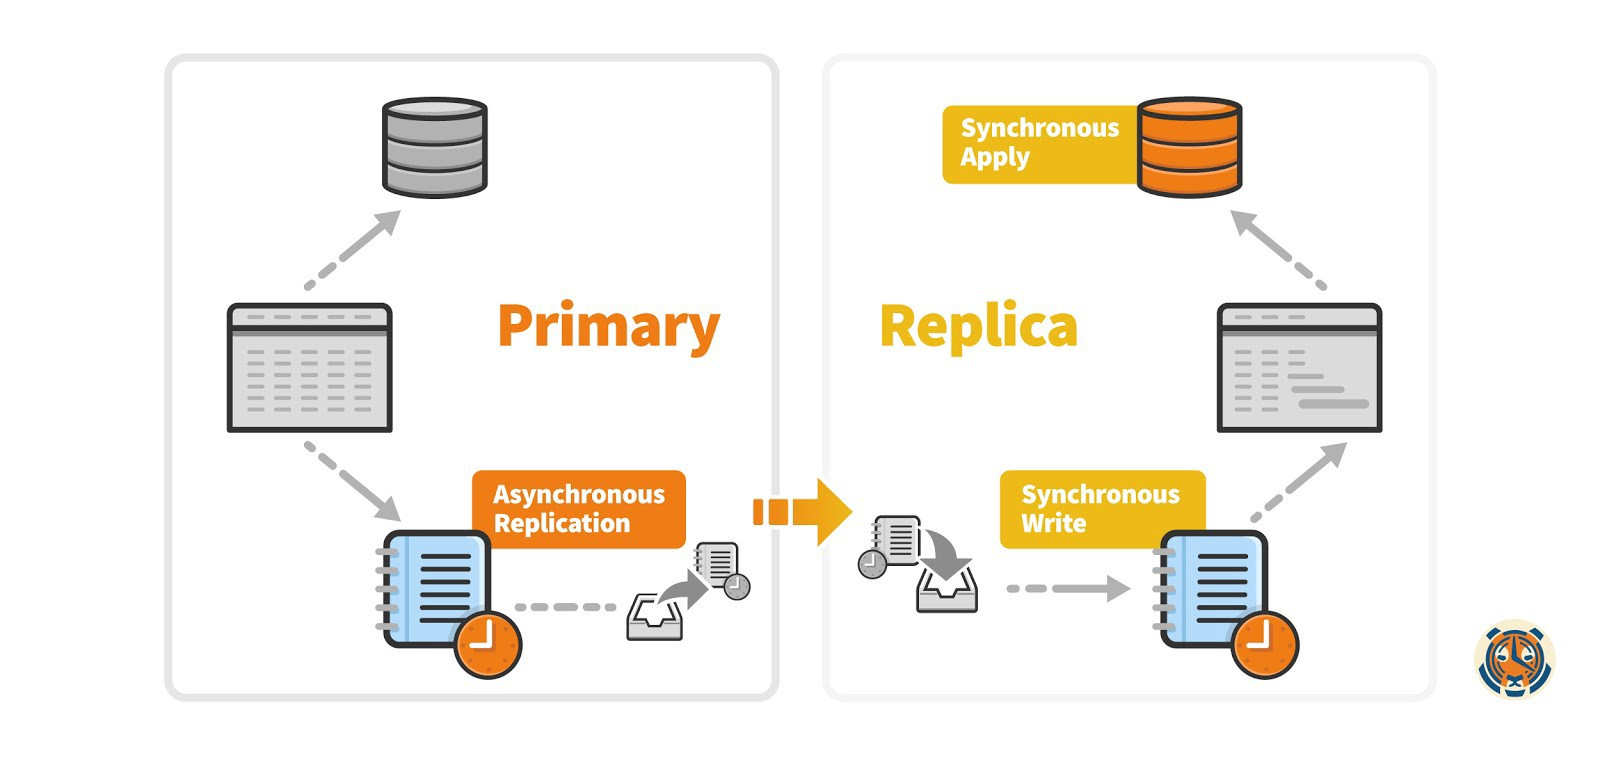 Asynchronous Replication returns to the client after data has been written to the primary’s WAL, Synchronous Write returns when data has been written to the replica’s WAL, and Synchronous Apply returns when the replica’s WAL has been applied and made queryable.